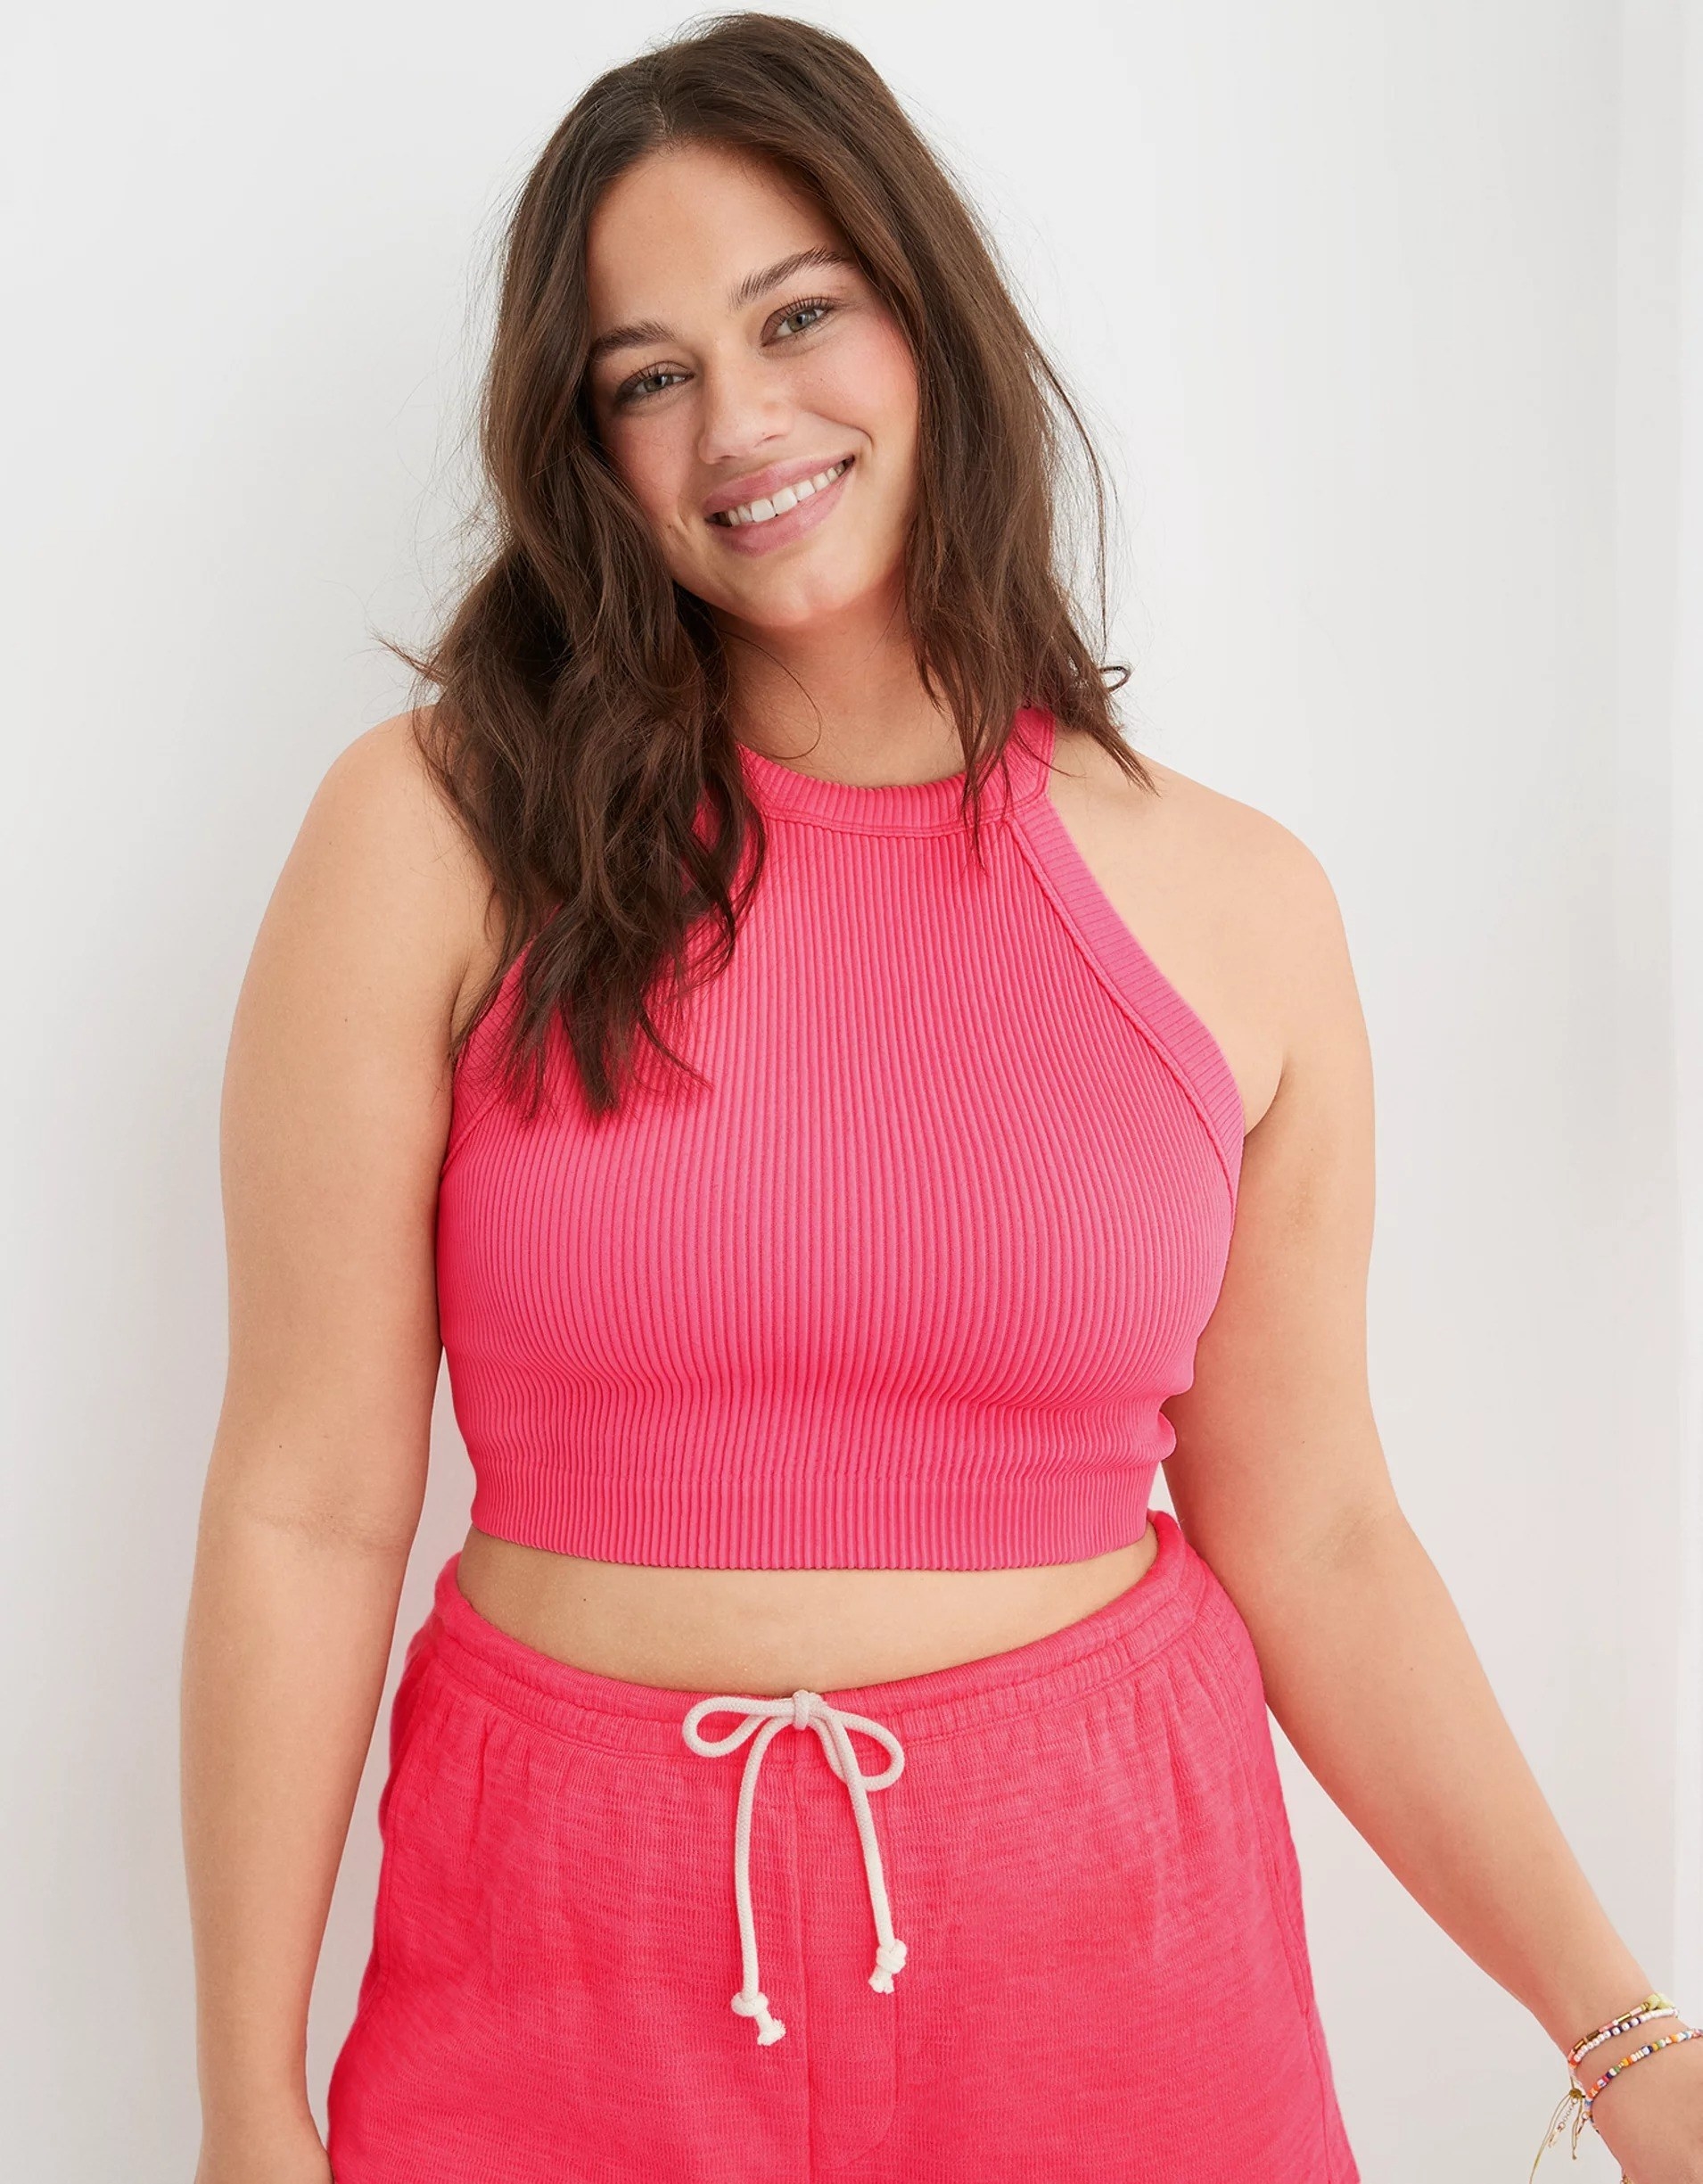 A model wearing the bralette in pink with matching bottoms